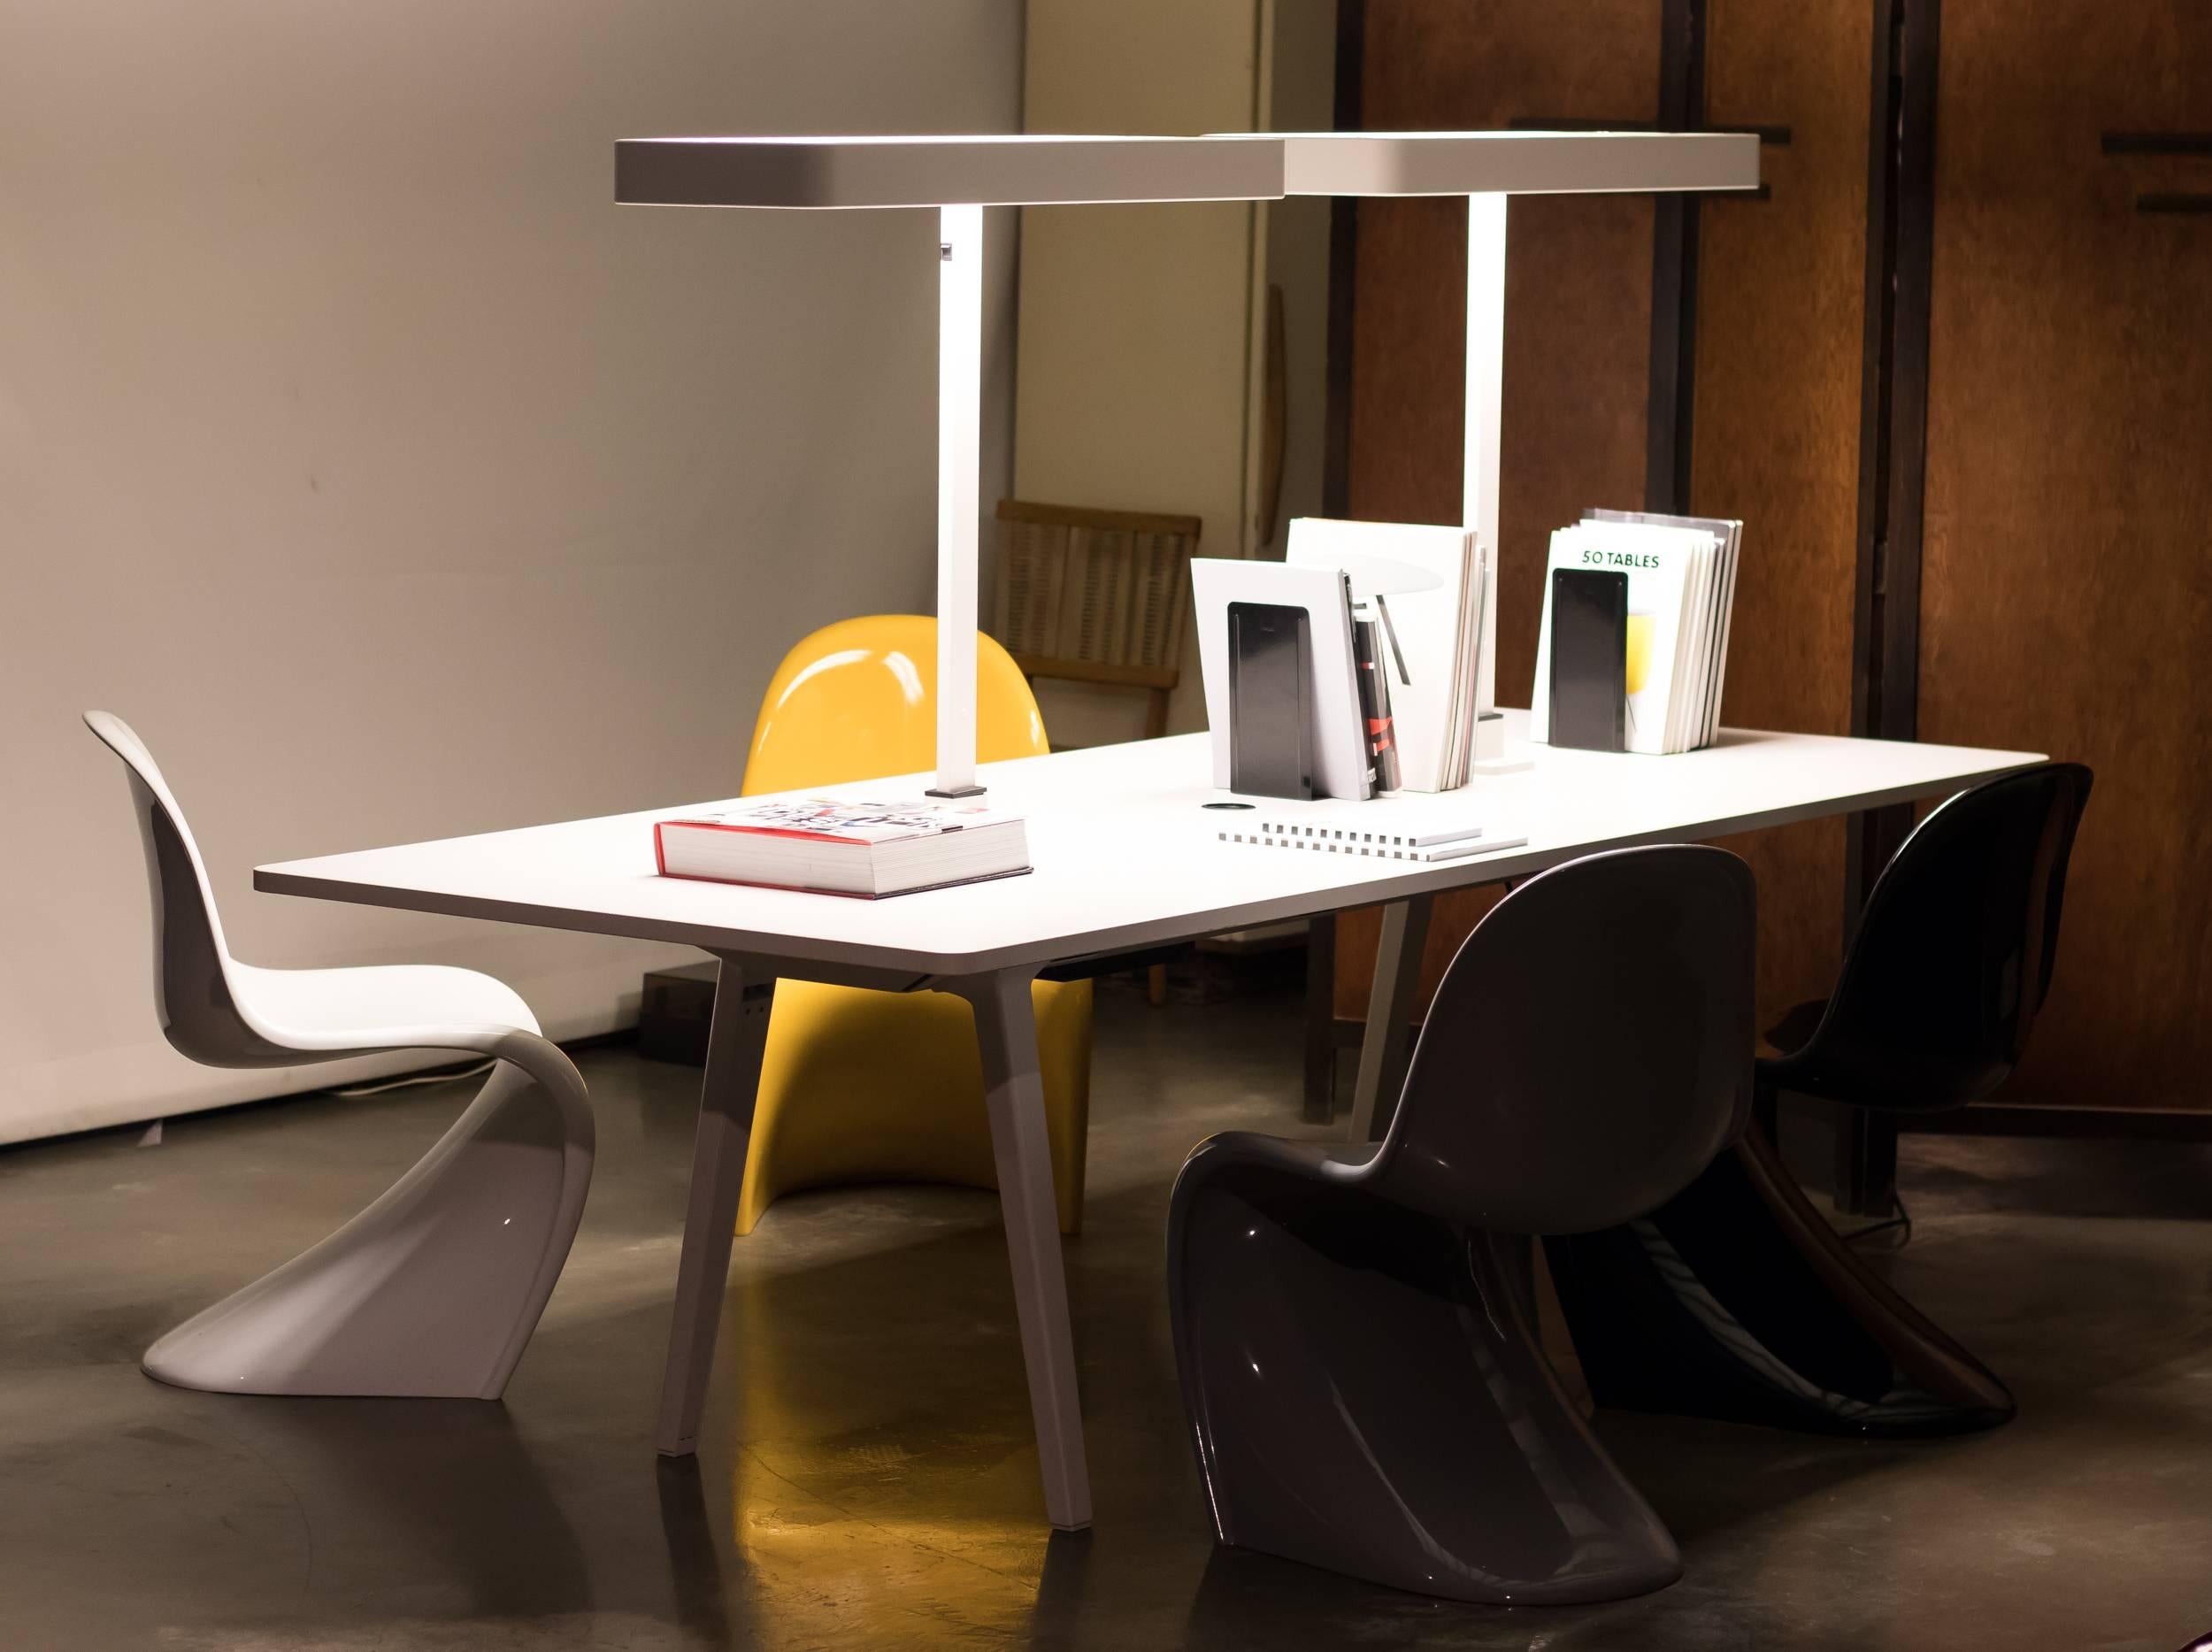 Vitra Joyn four person workstation designed by Ronan & Erwan Bouroullec, 2002
The price is for the entire unit in the image without the chairs and books.
This includes the two table mounted lights and a complete (under table) cable management